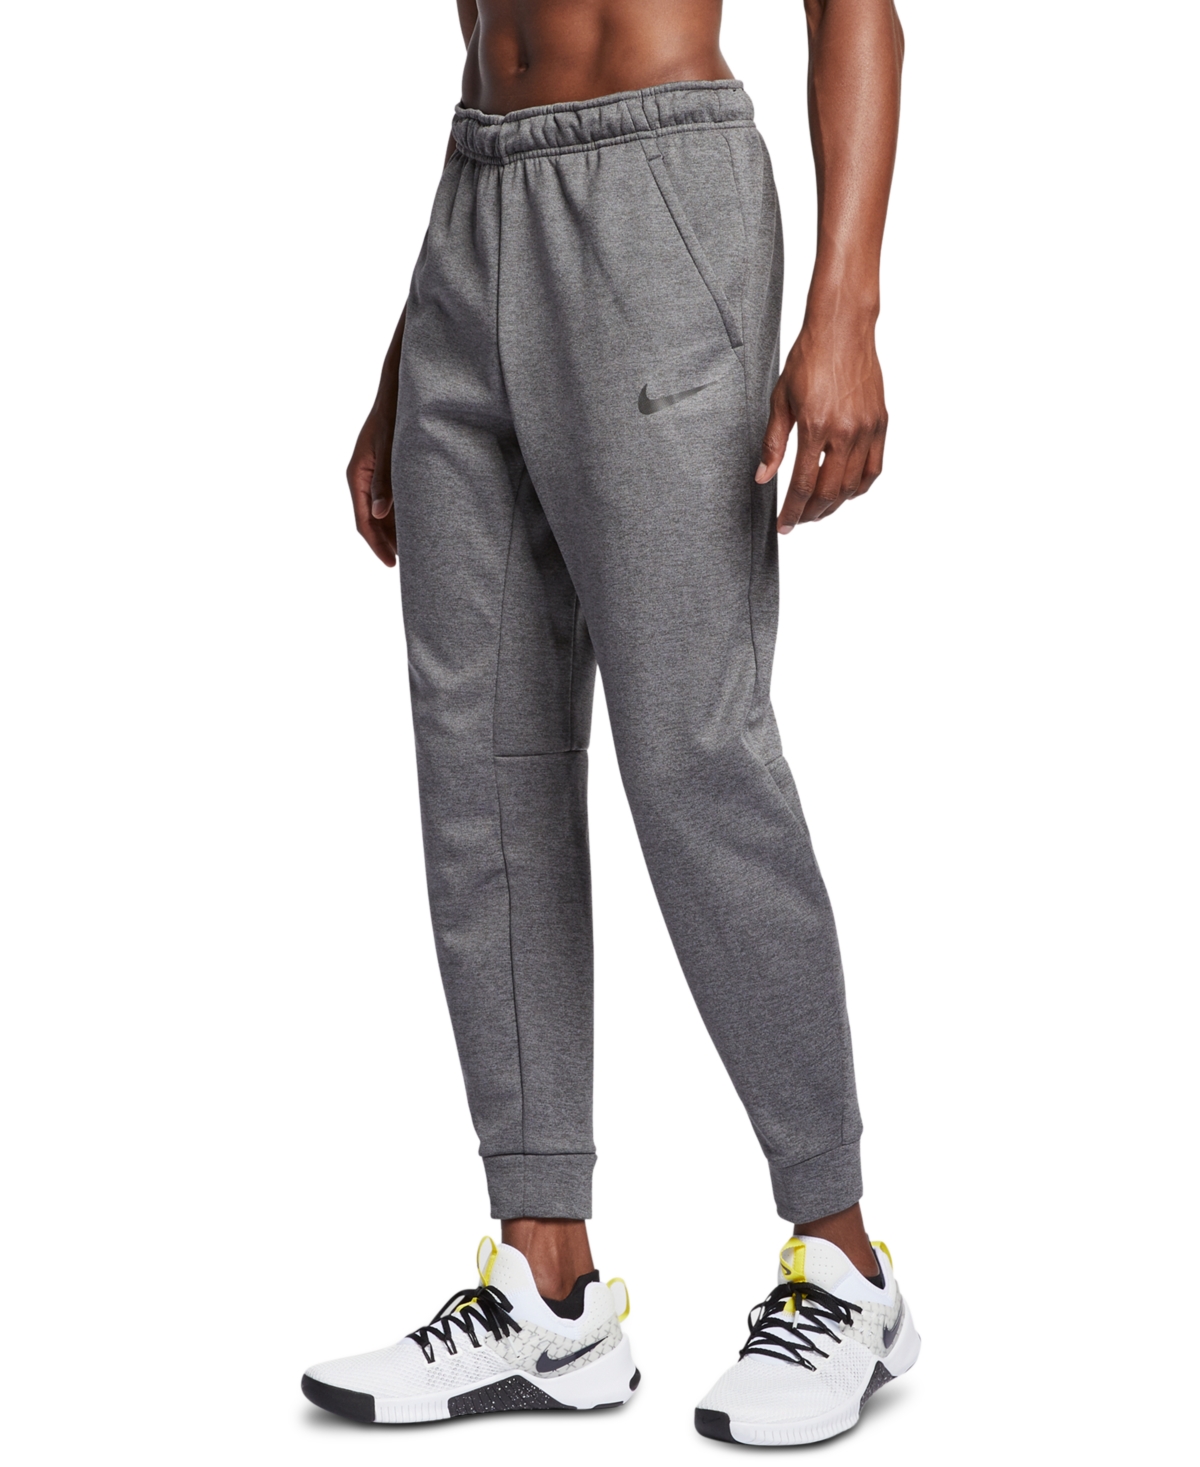 UPC 886668341293 product image for Nike Men's Therma Tapered Training Pants | upcitemdb.com